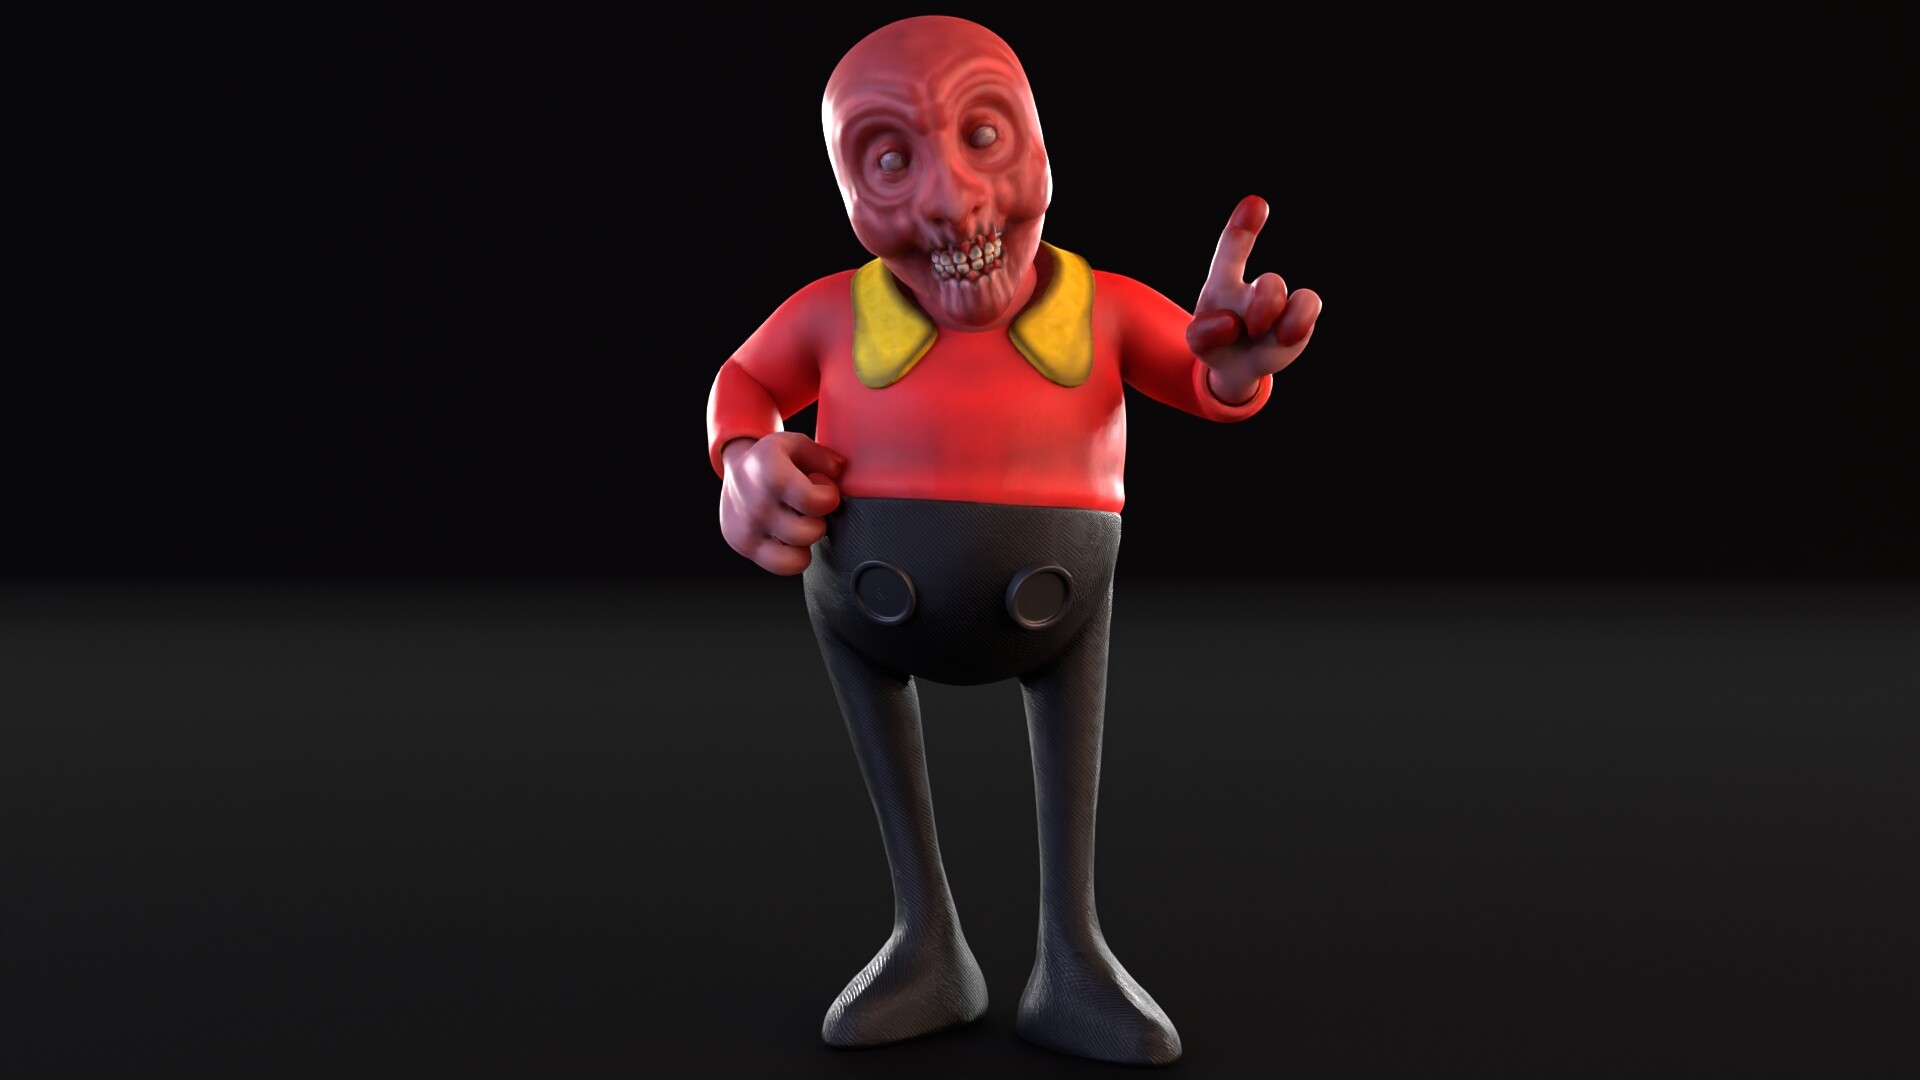 edited official Eggman render to be Starved Eggman by